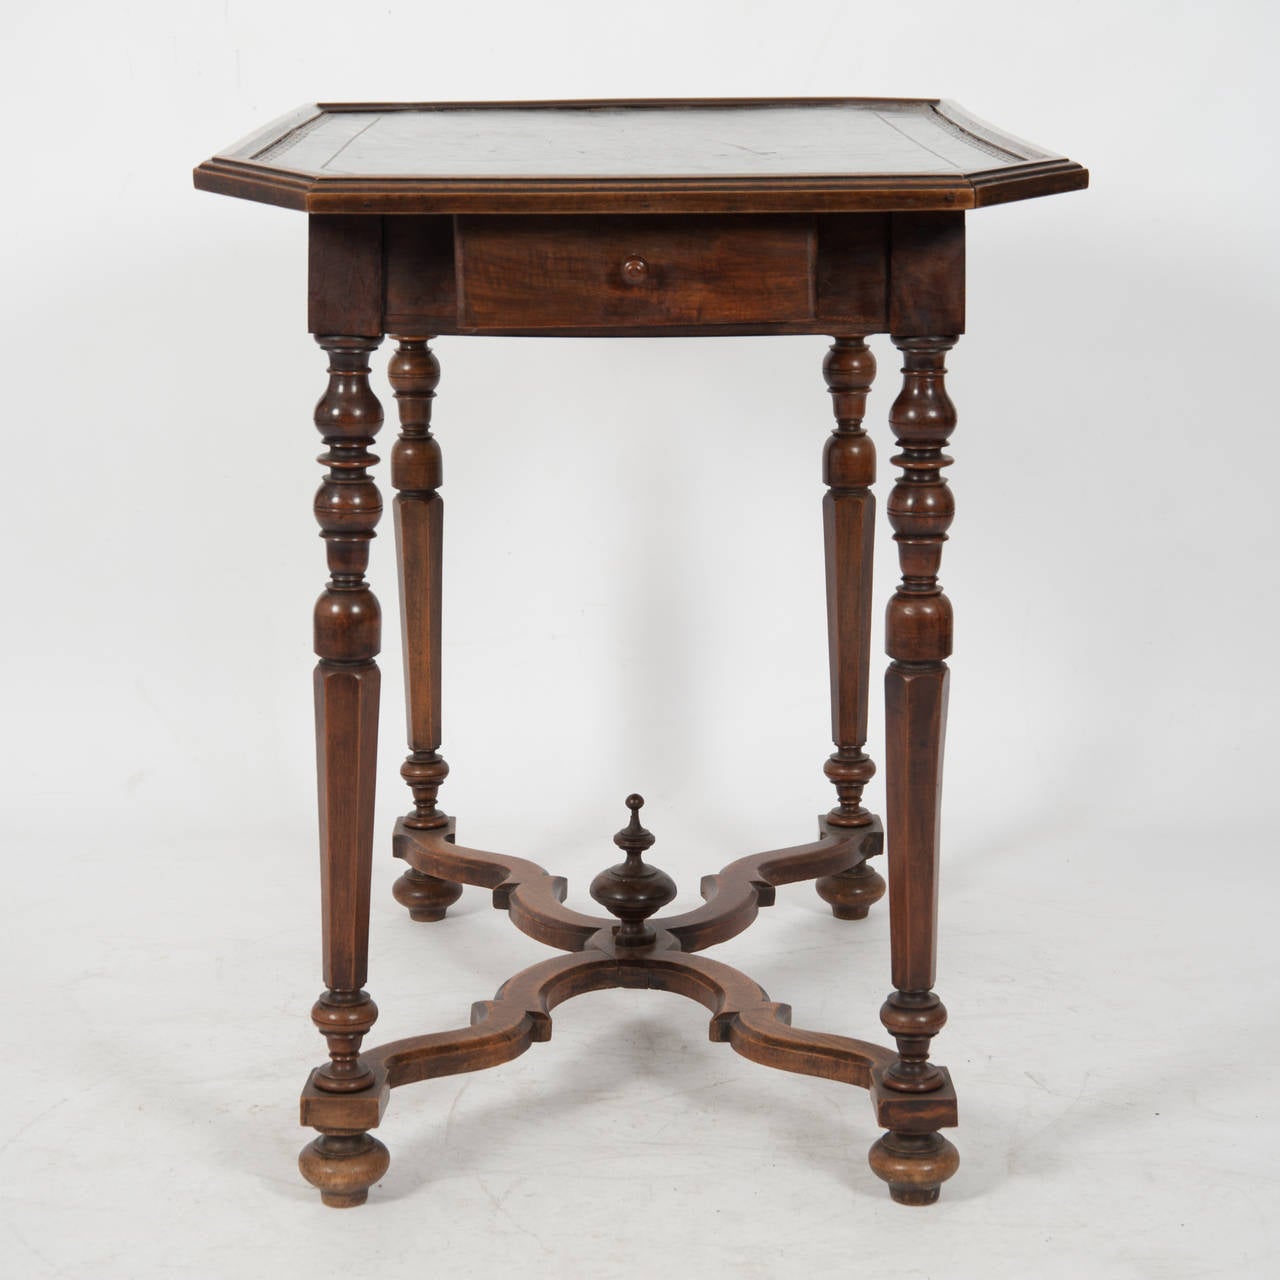 Superbly Patinated French Walnut Side Table circa 1800 Tooled Leather Top With A Moulded Edge Raised On Turned Chamfered Pillars Joined By A Wavy X Stretcher On Bun Feet With Central Finial